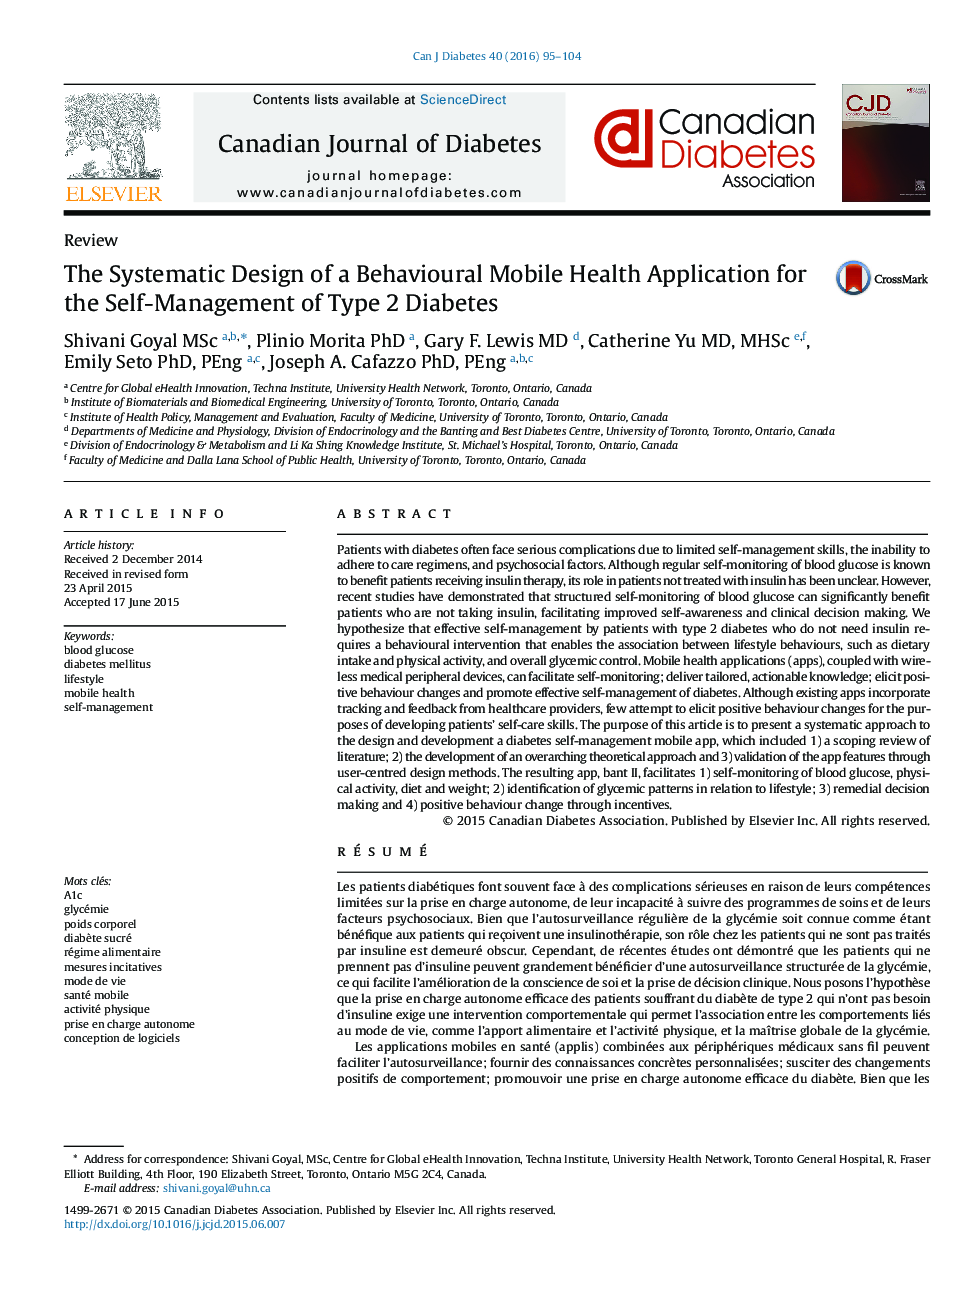 The Systematic Design of a Behavioural Mobile Health Application for the Self-Management of Type 2 Diabetes